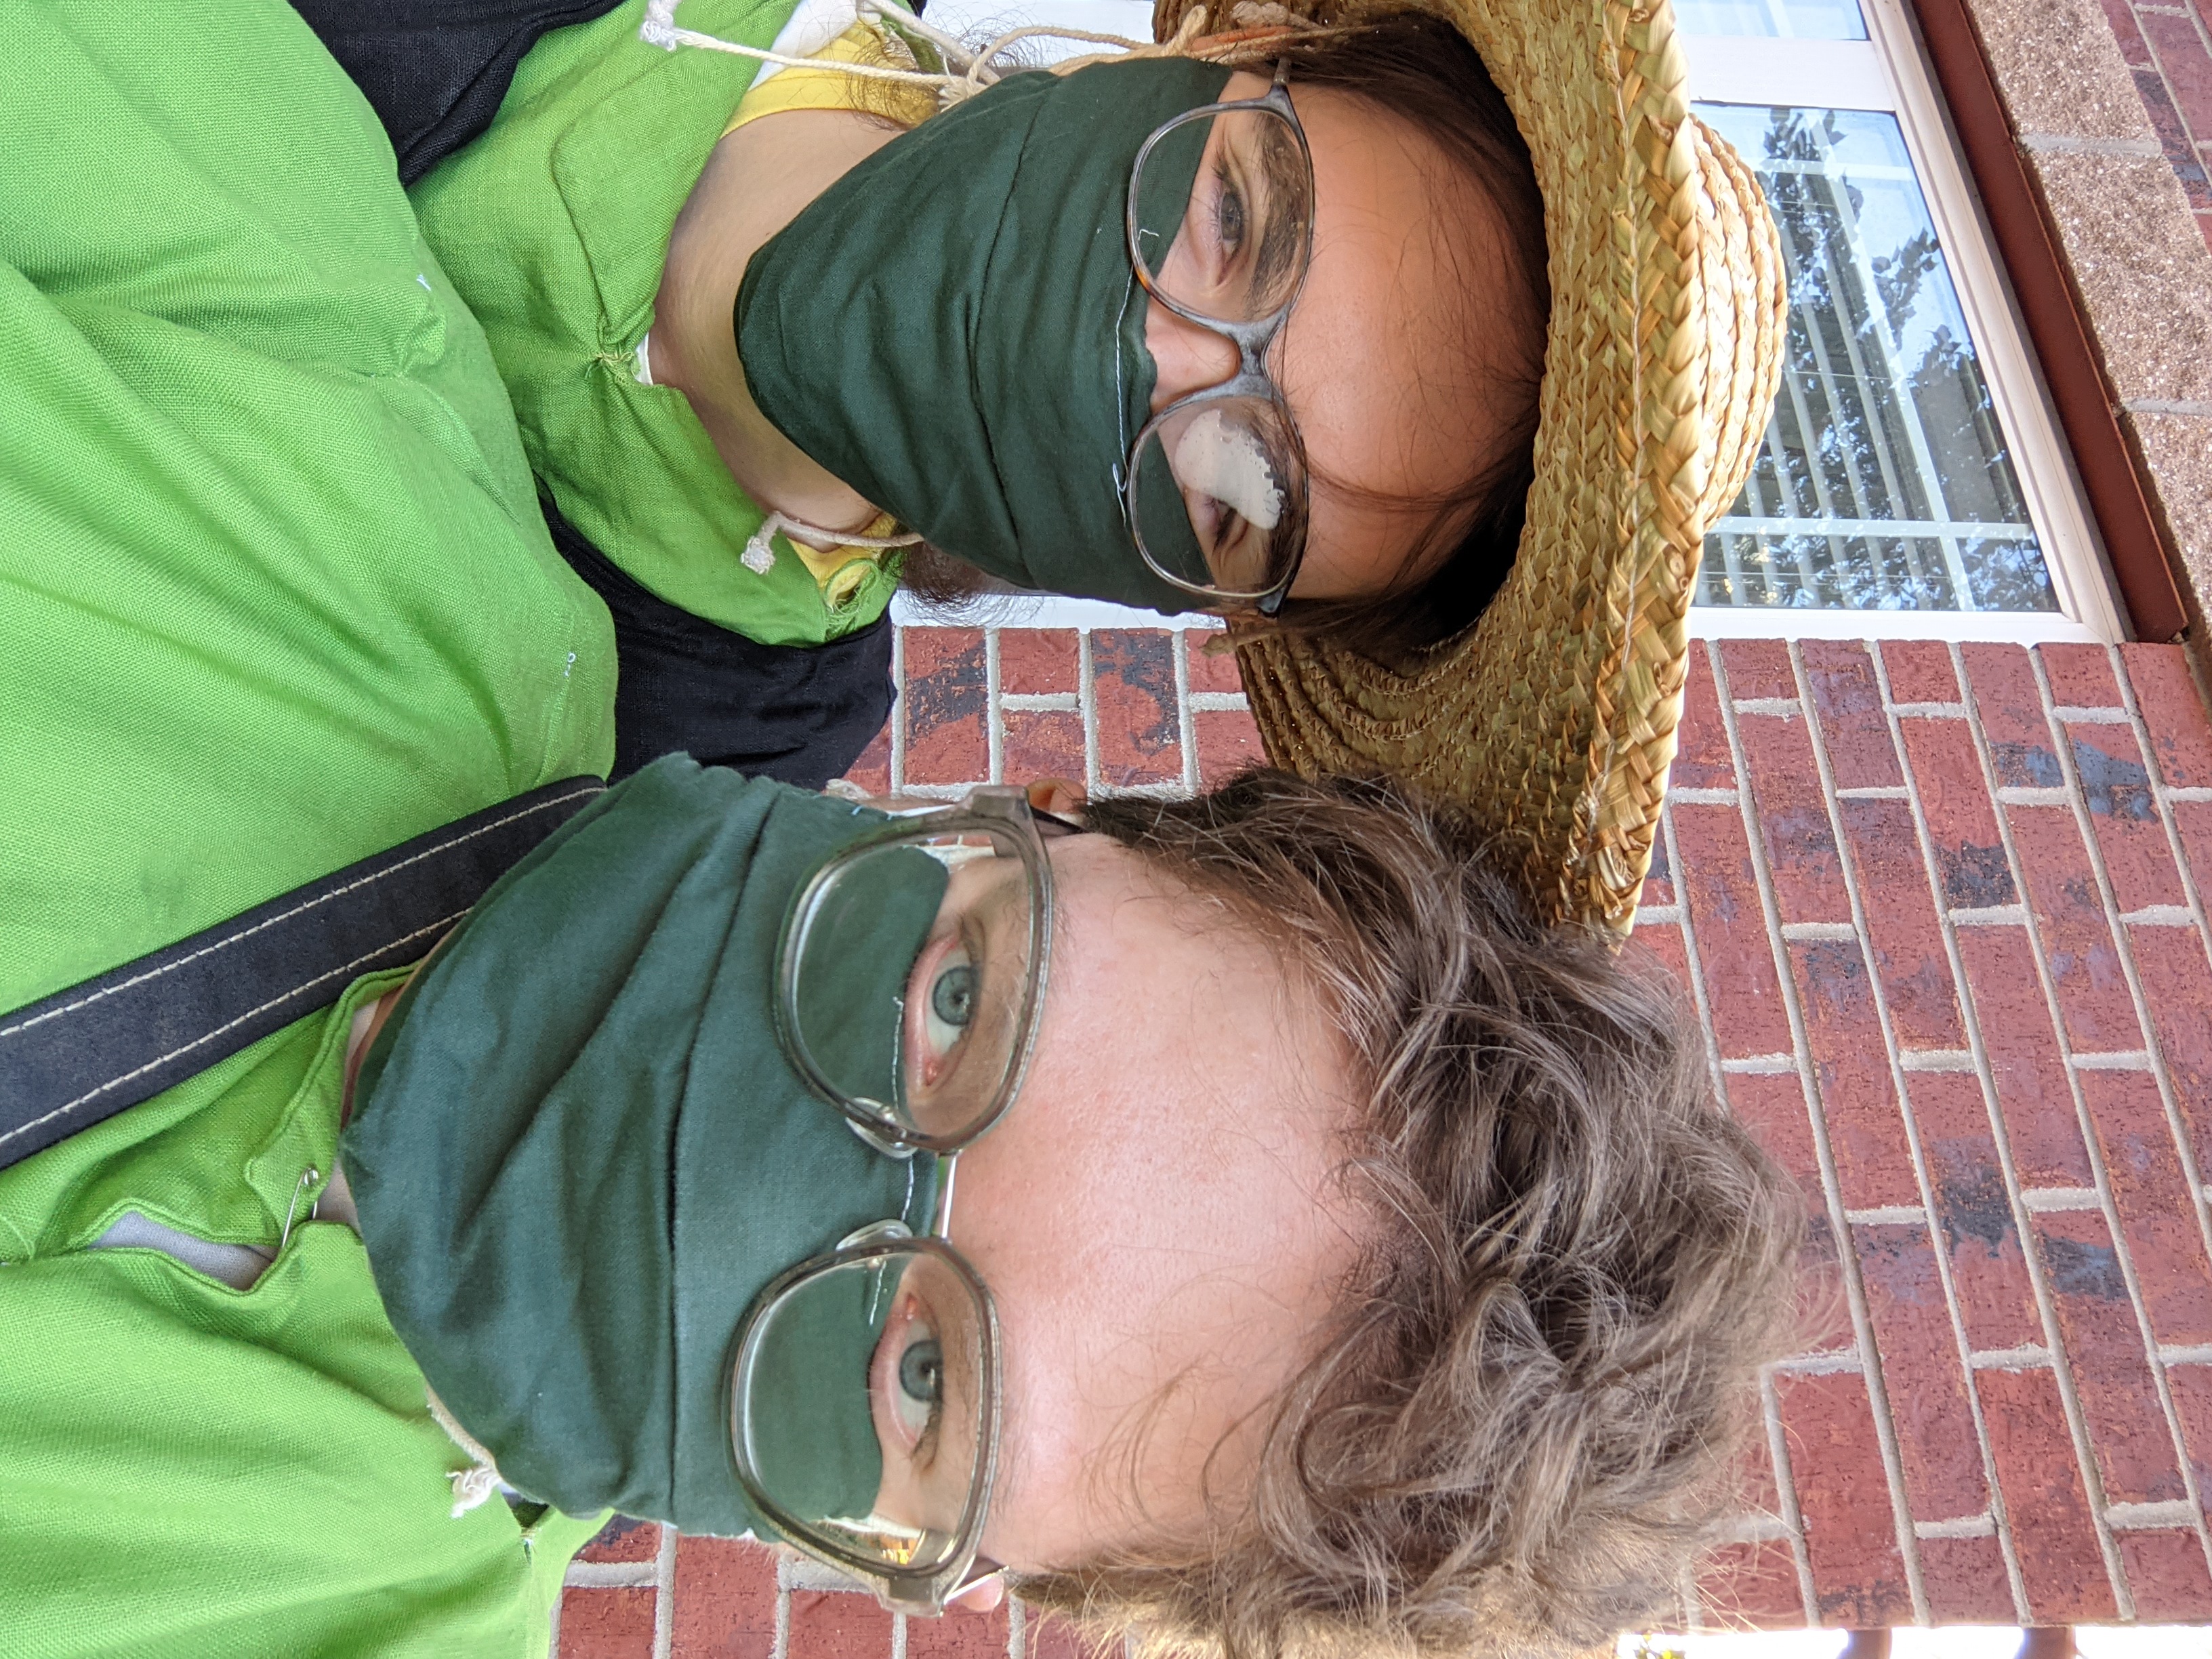 Selfie of two smiling people in masks and green cotes.